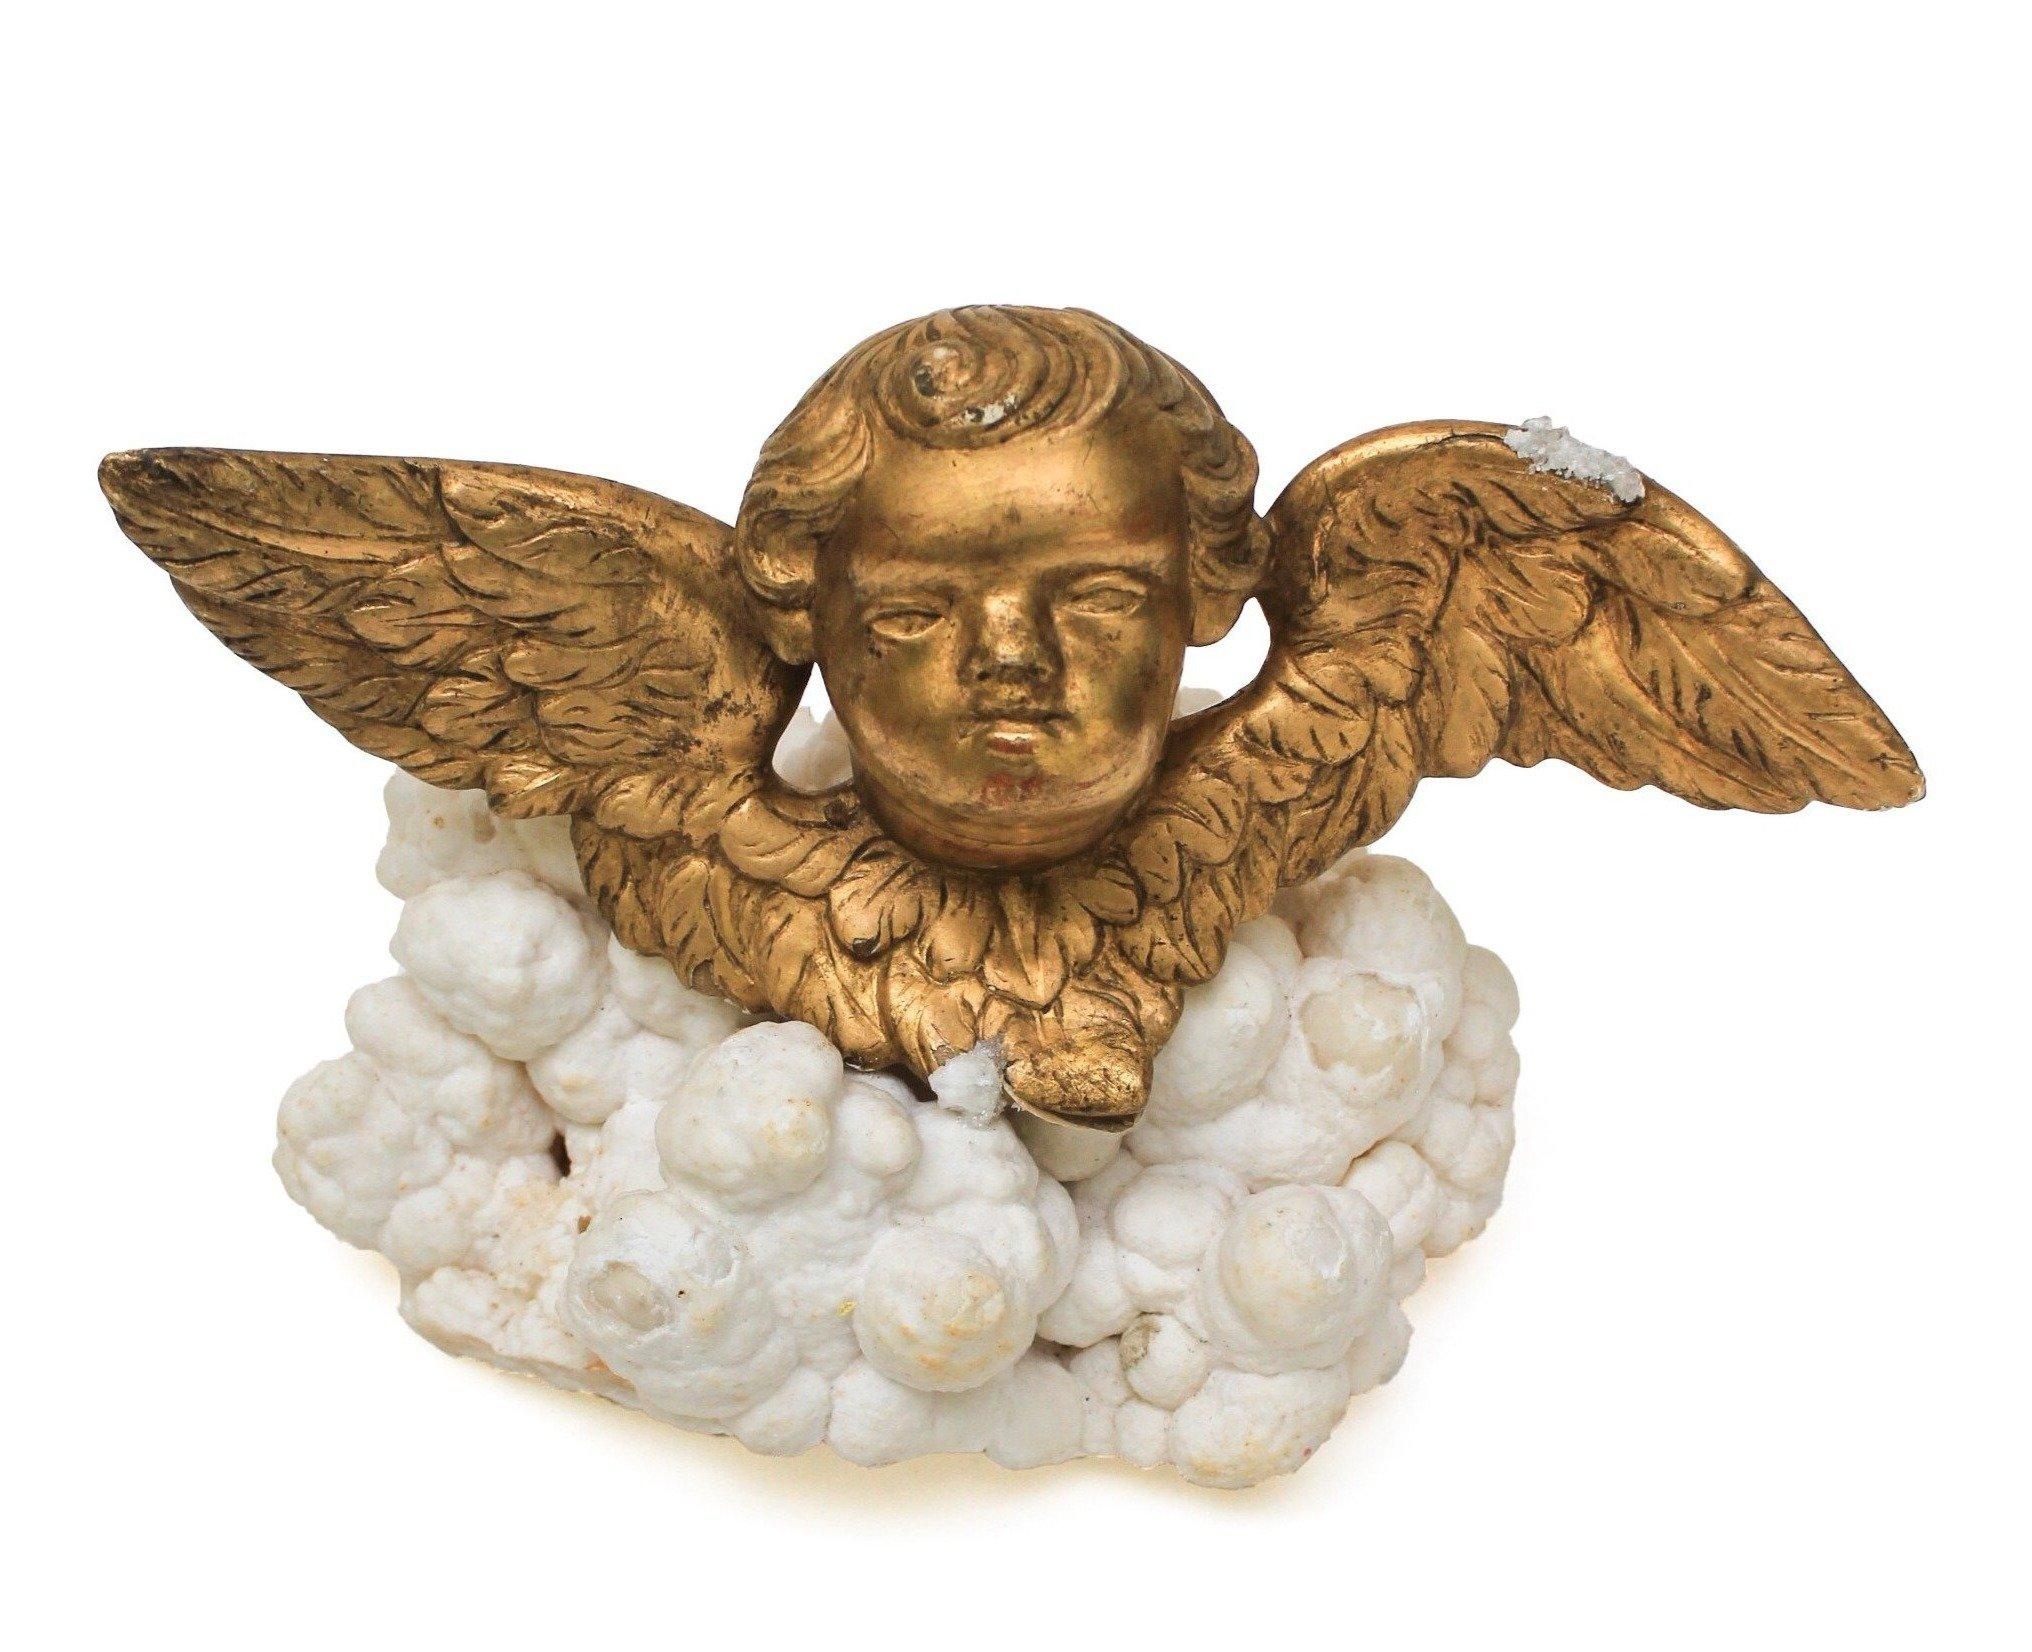 18th Century Italian gold leaf putto mounted on aragonite. A Putto is a cherub figure frequently appearing in both mythological and religious paintings and sculpture, especially of the Renaissance and Baroque periods. 

This was once used as part